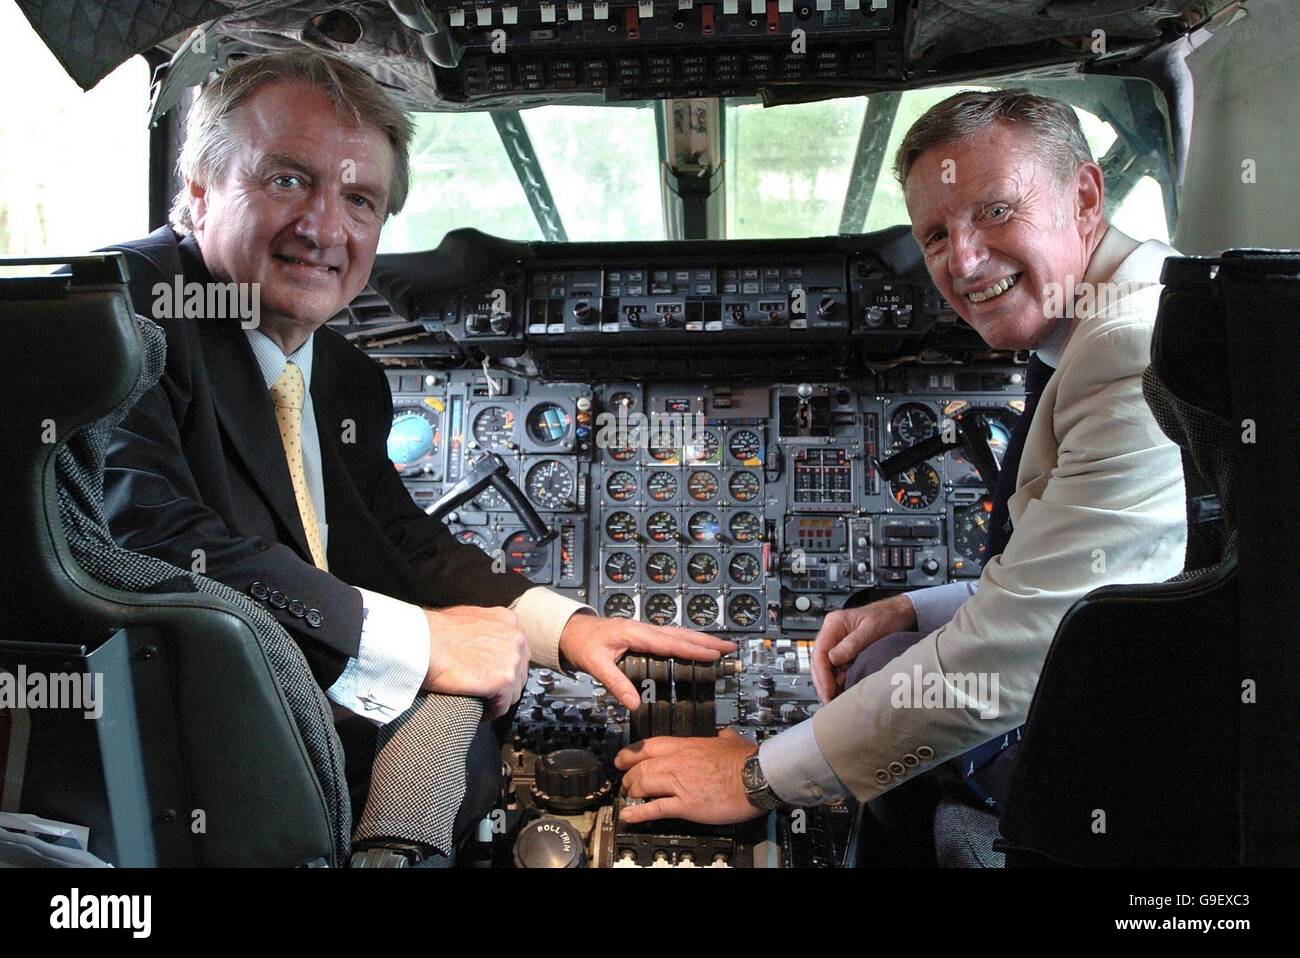 Concorde Pilots High Resolution Stock Photography and Images - Alamy